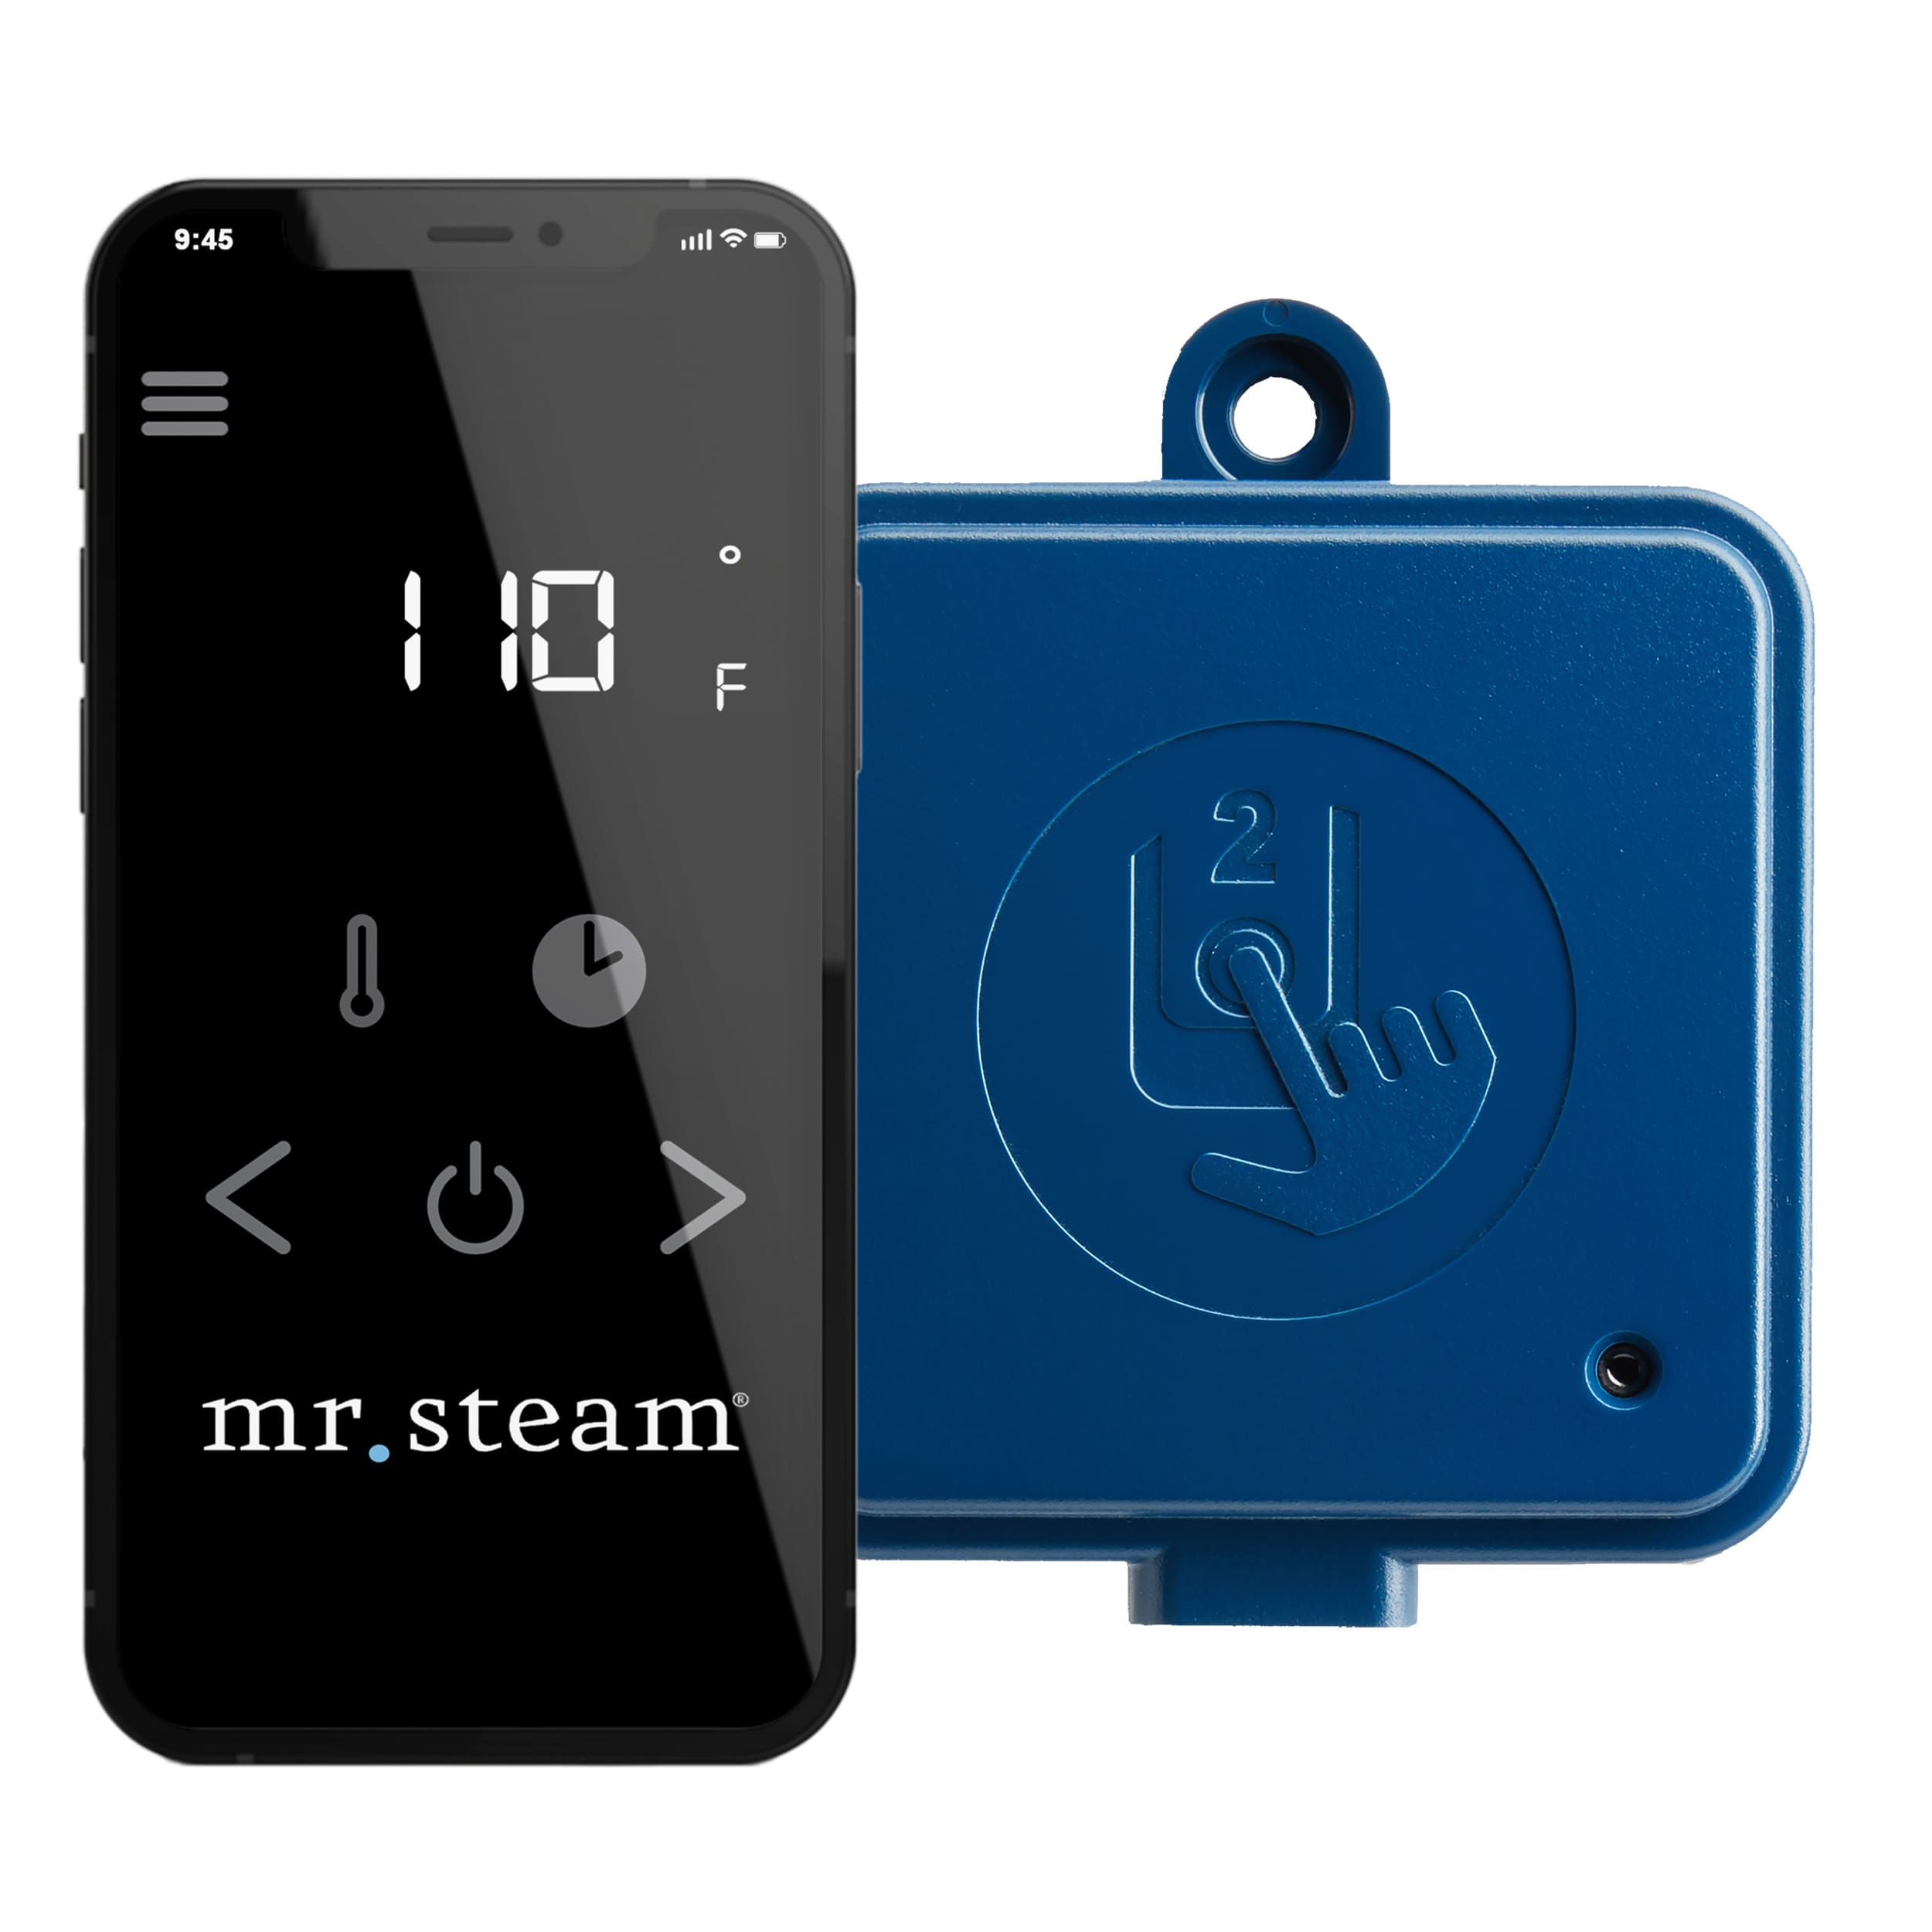 Mr. Steam Wireless Connectivity Module With Mobile App For iSteam®3, iTempoPlus®, AirTempo® Controls